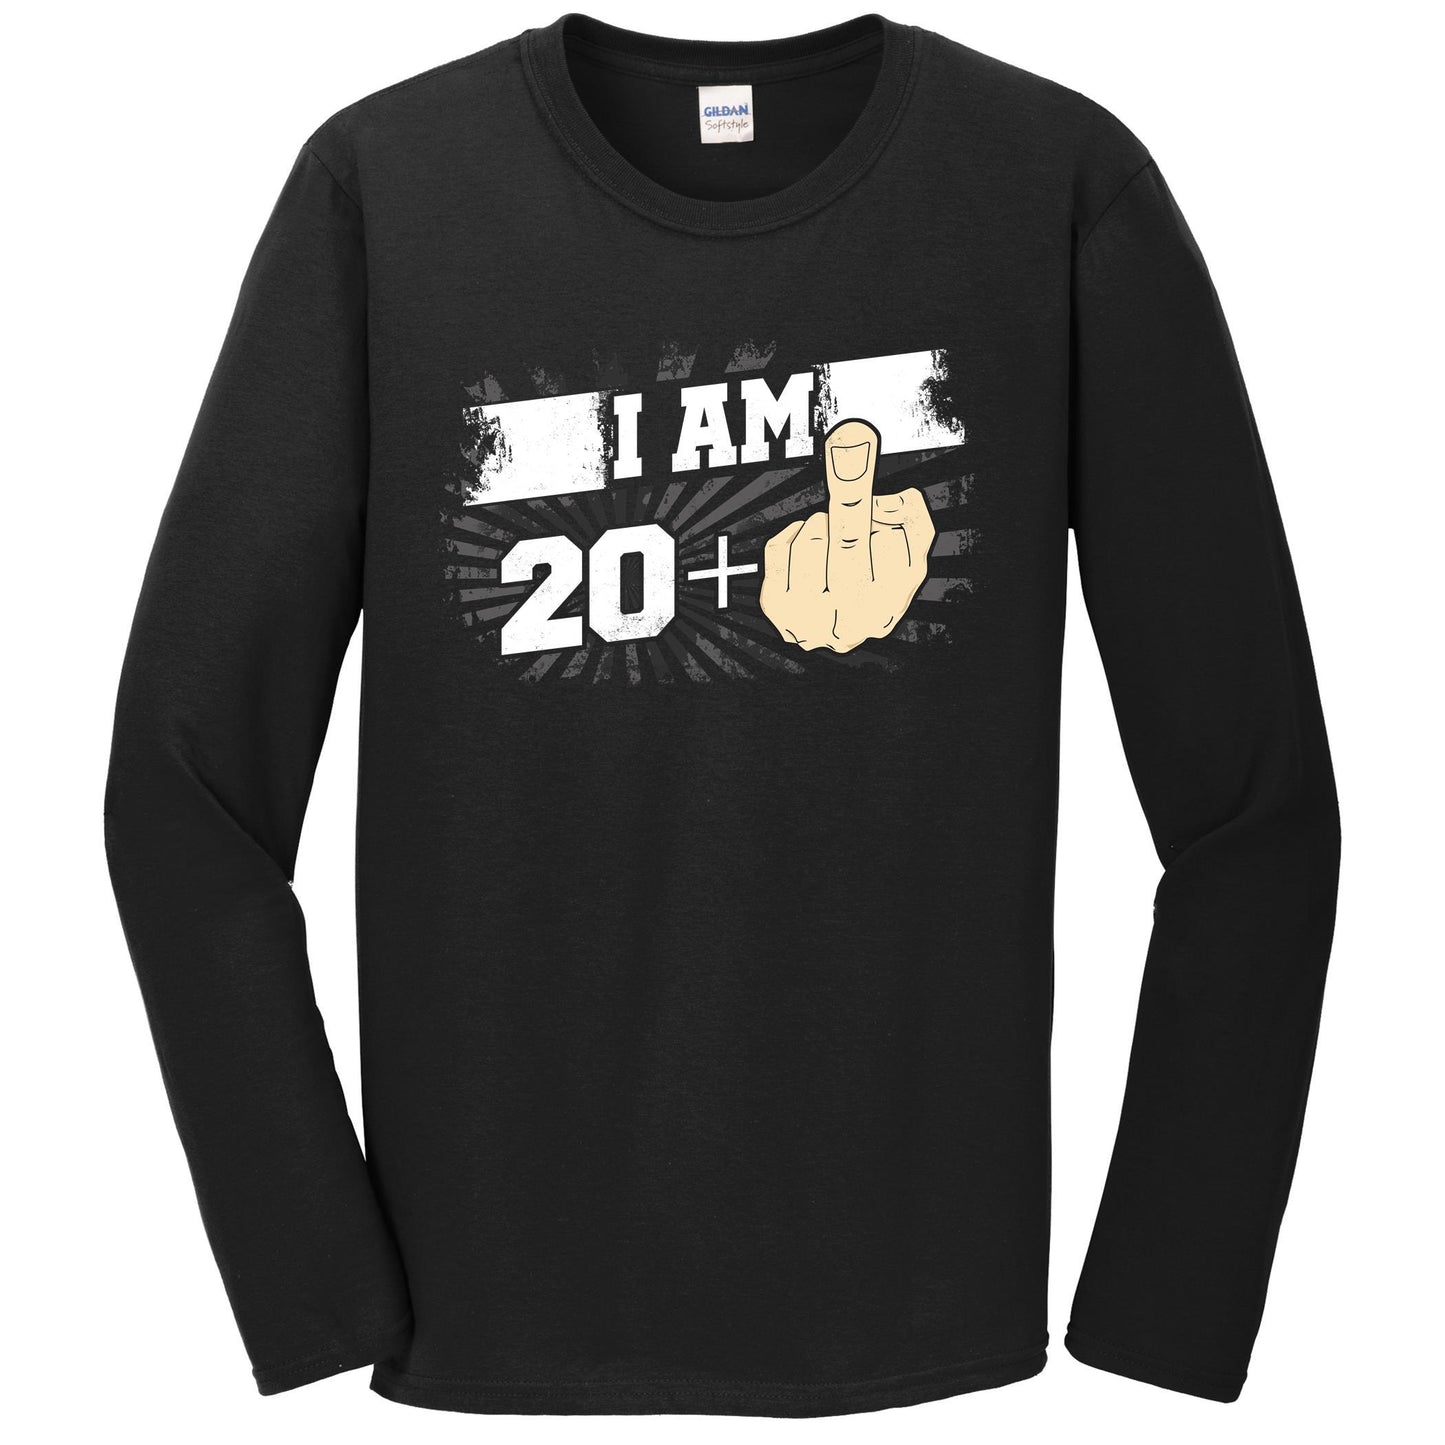 21st Birthday Shirt For Men - I Am 20 Plus Middle Finger 21 Years Old Long Sleeve T-Shirt